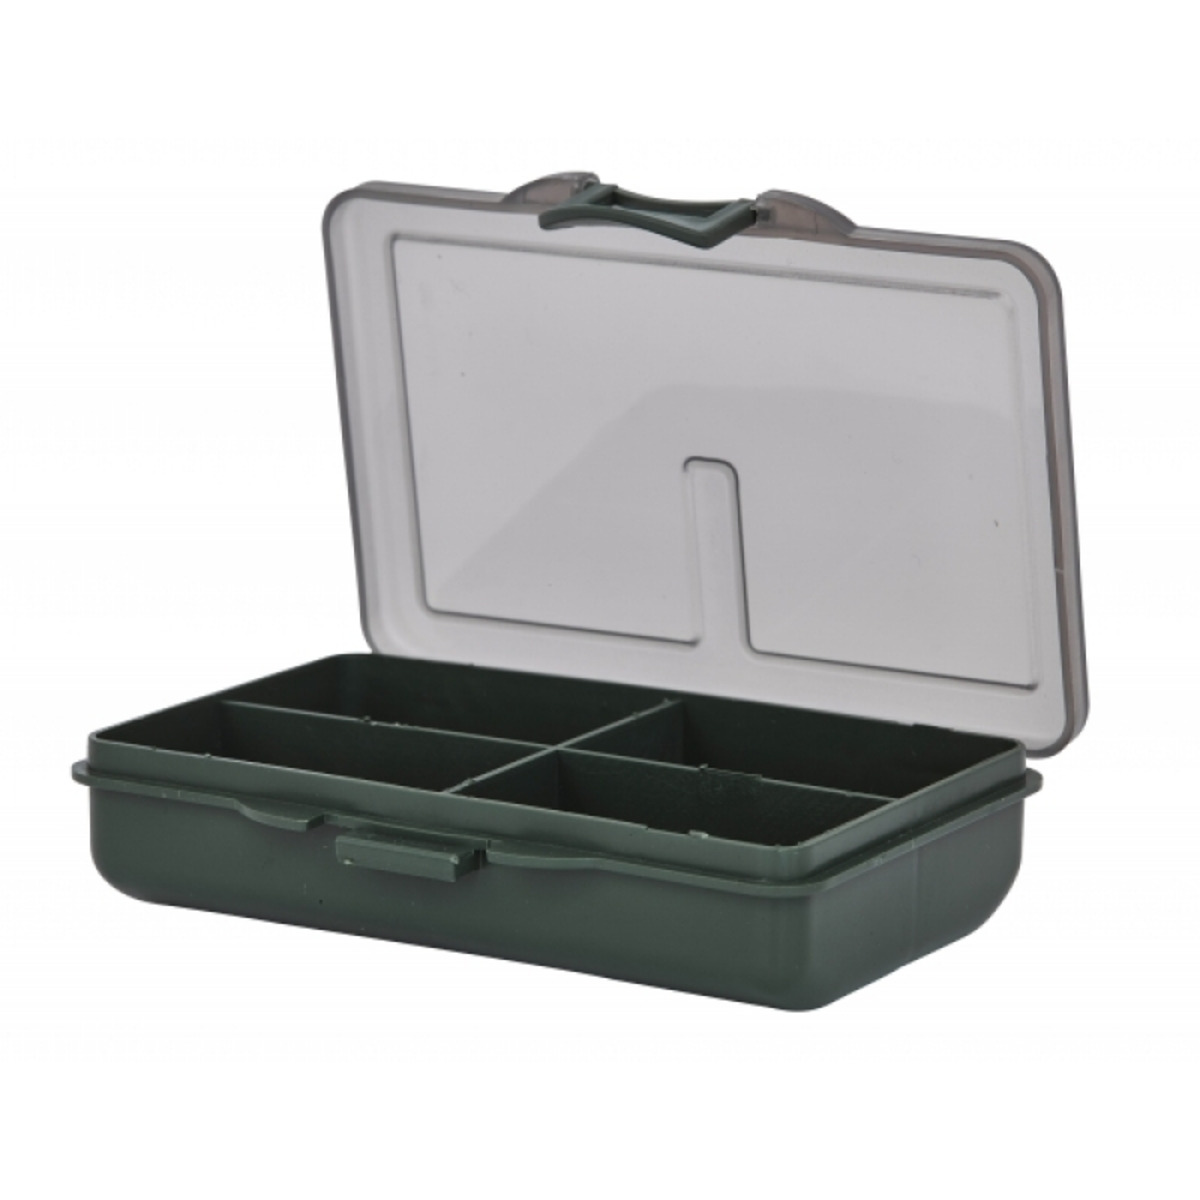 Starbaits Session Small Box - 4 Compartments         